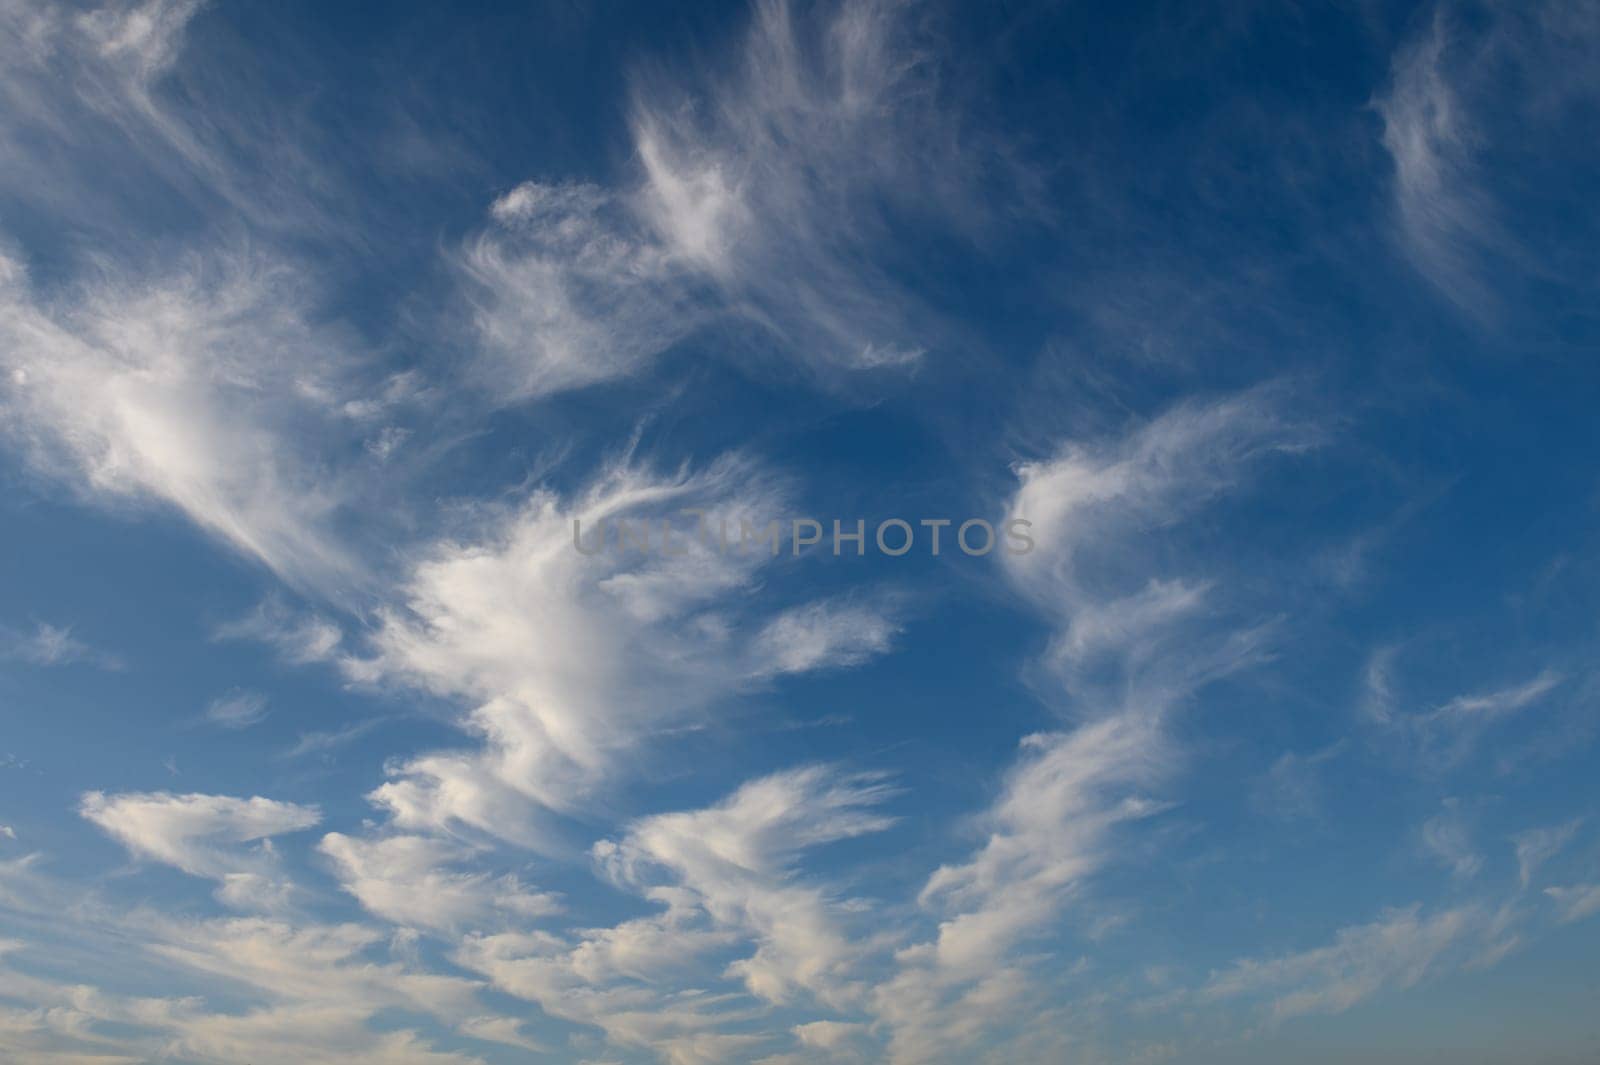 morning blue sky with cirrus clouds in Cyprus 4